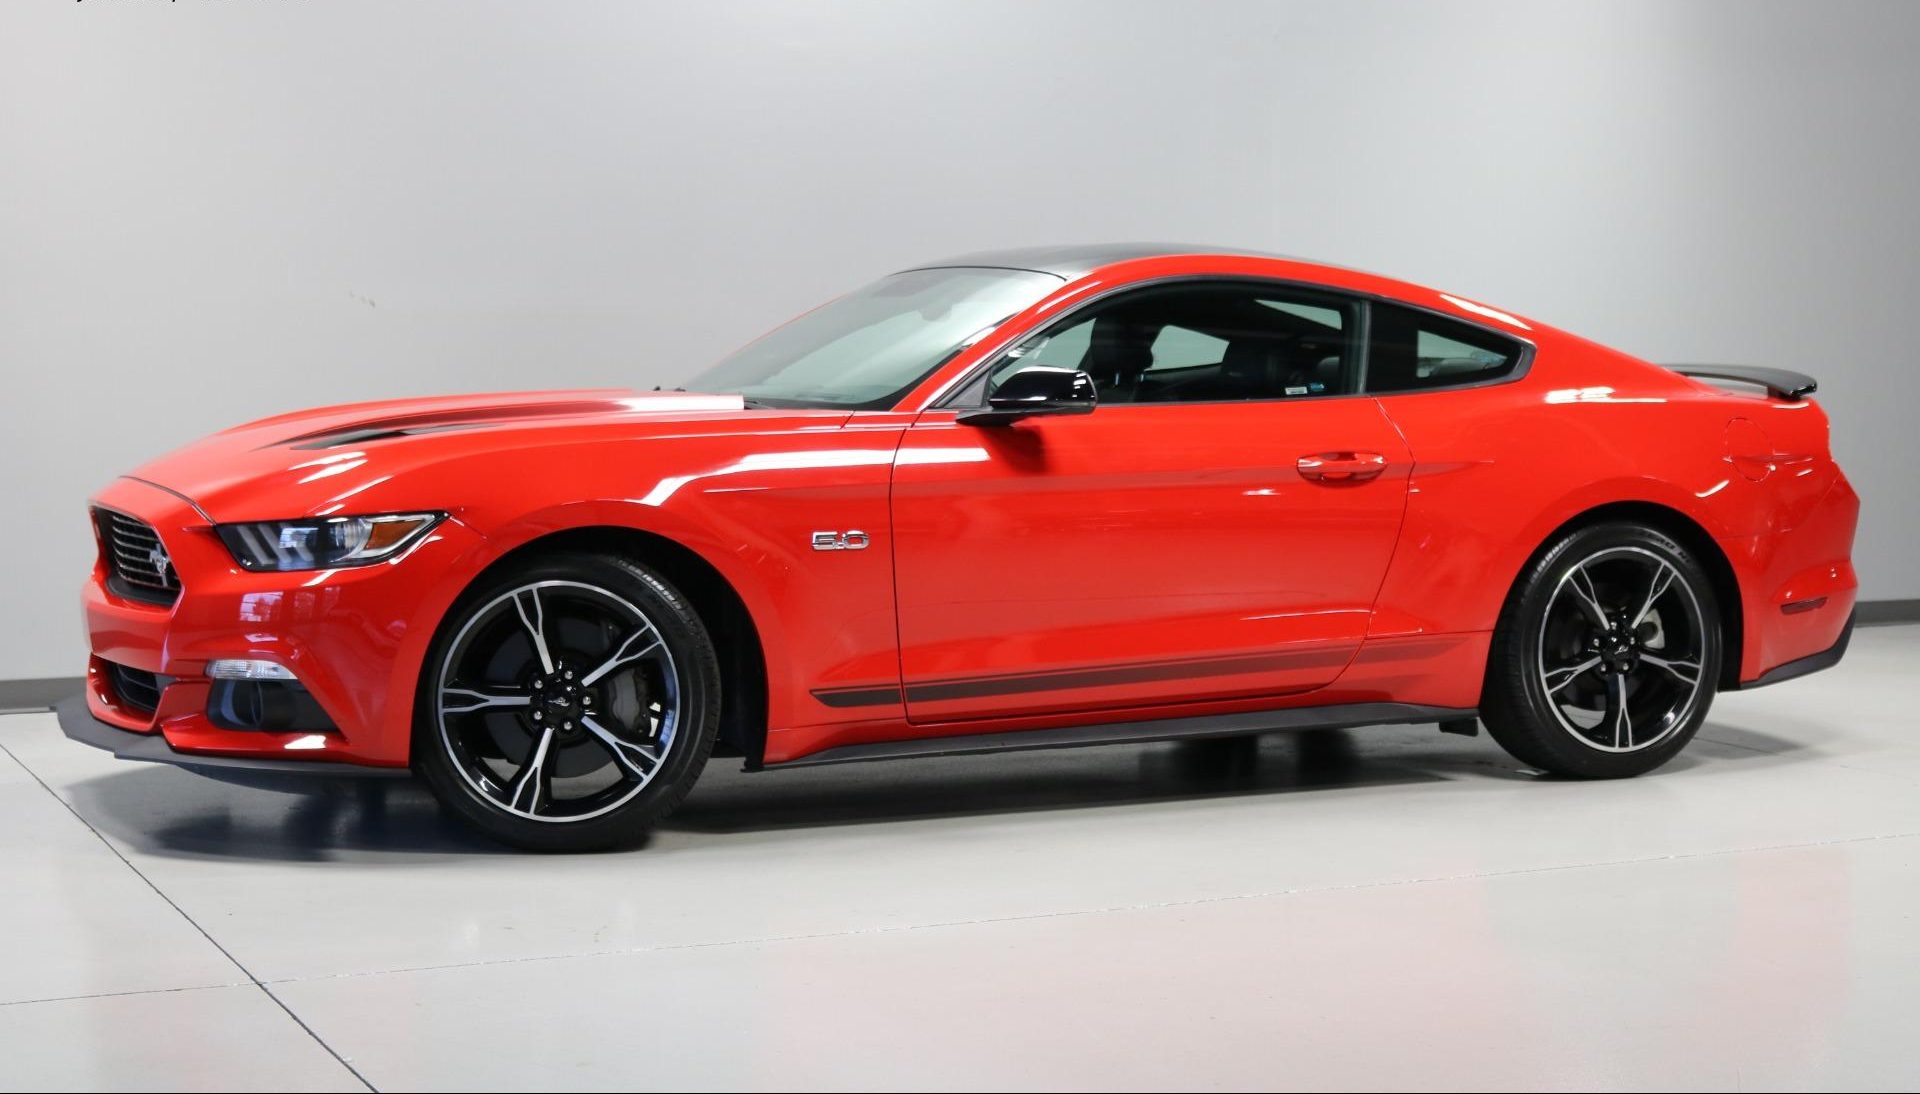 Mustang Of The Day: 2017 Ford Mustang GT/CS California Special